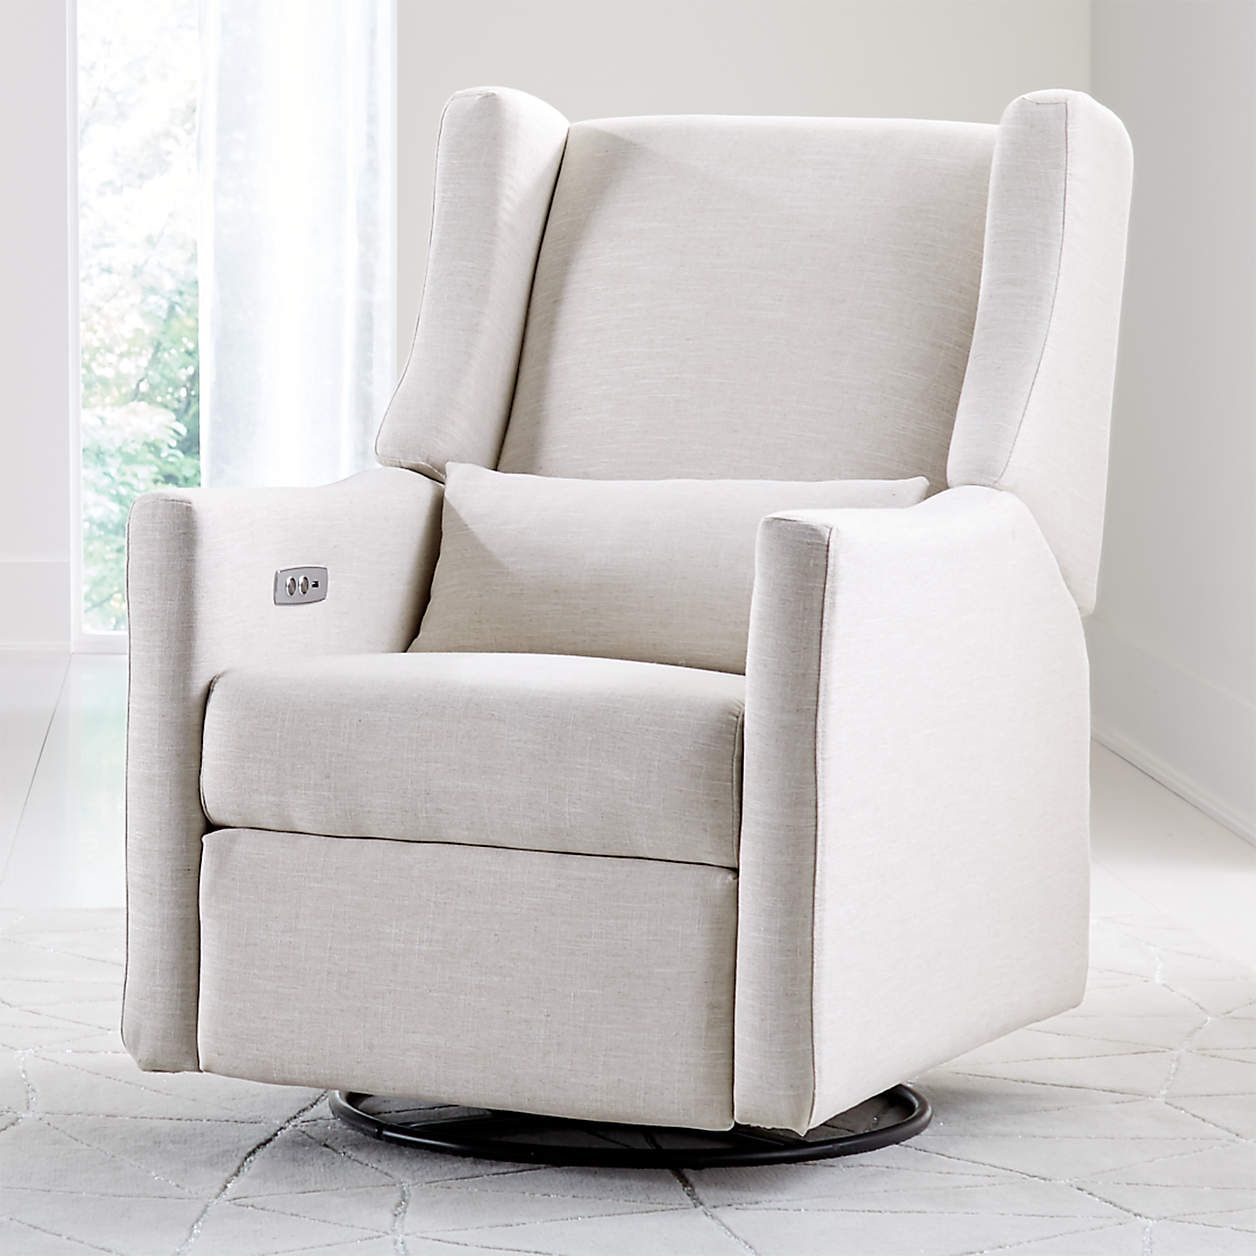 Babyletto Kiwi Power Recliner Glider + Reviews | Crate and Barrel | Crate & Barrel